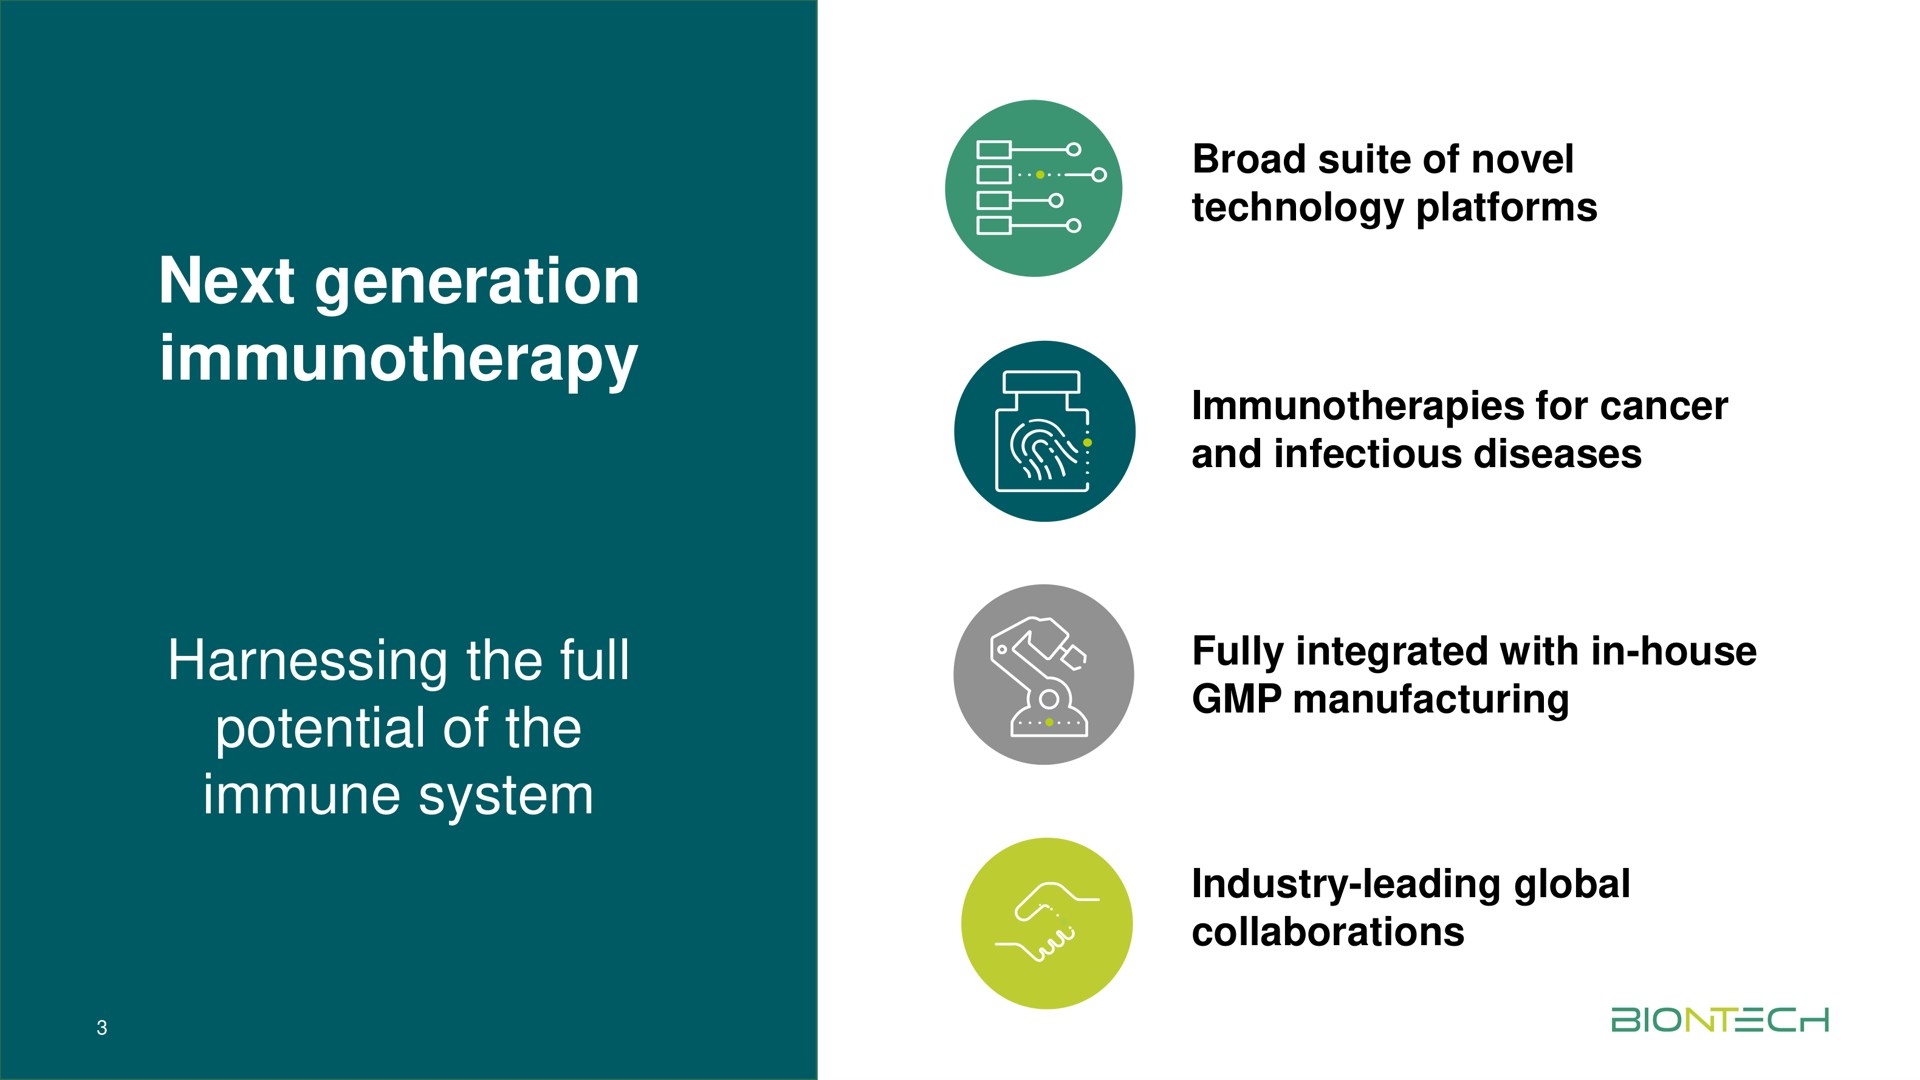 next generation harnessing the full potential of the immune system broad suite of novel technology platforms for cancer and infectious diseases fully integrated with in house manufacturing industry leading global collaborations | BioNTech